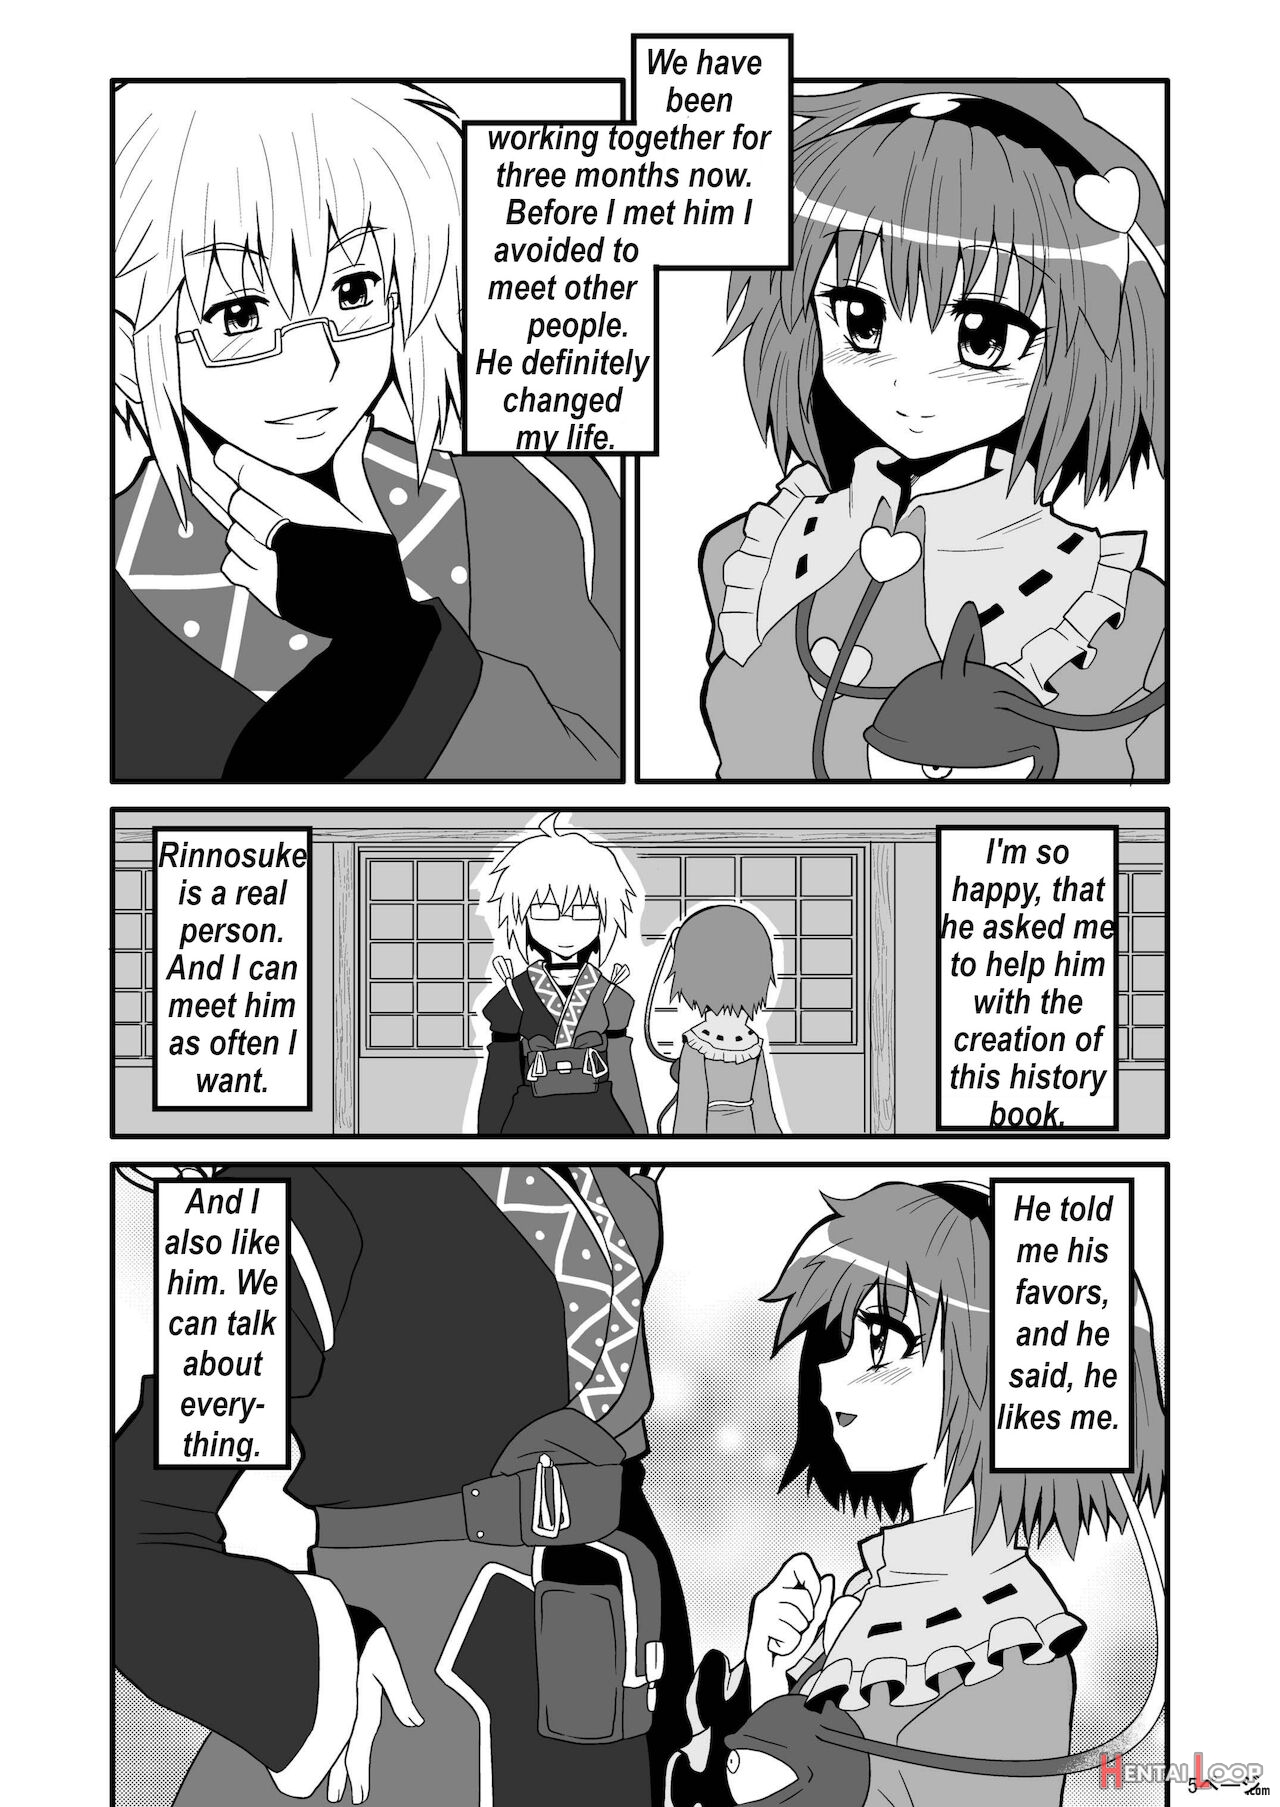 Marisa's Thrill - Take Care Of Yourself - 通り魔理沙にきをつけろ - Part 1 page 7